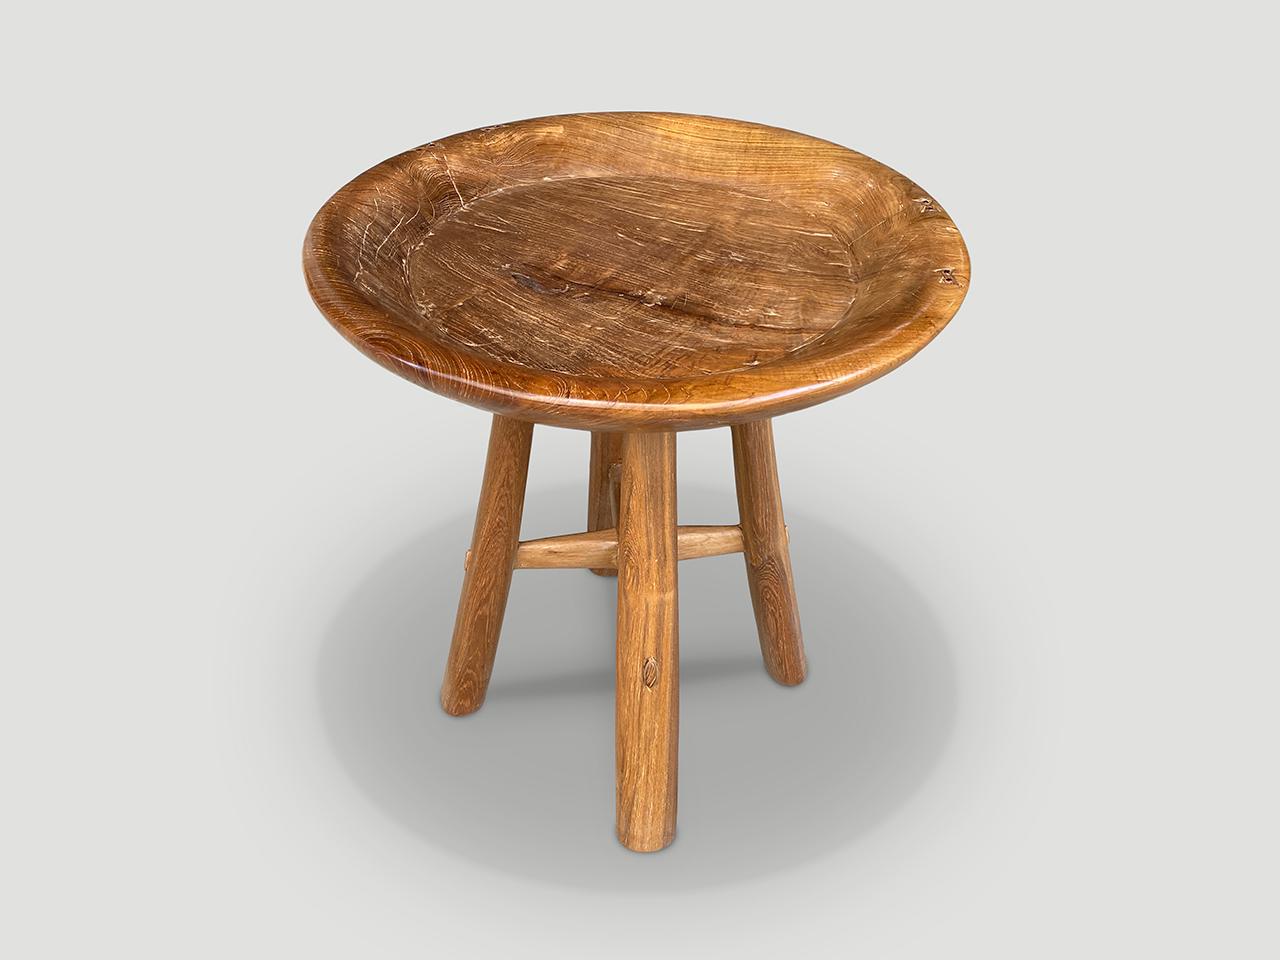 Andrianna Shamaris Midcentury Couture Antique Side Table In Excellent Condition For Sale In New York, NY